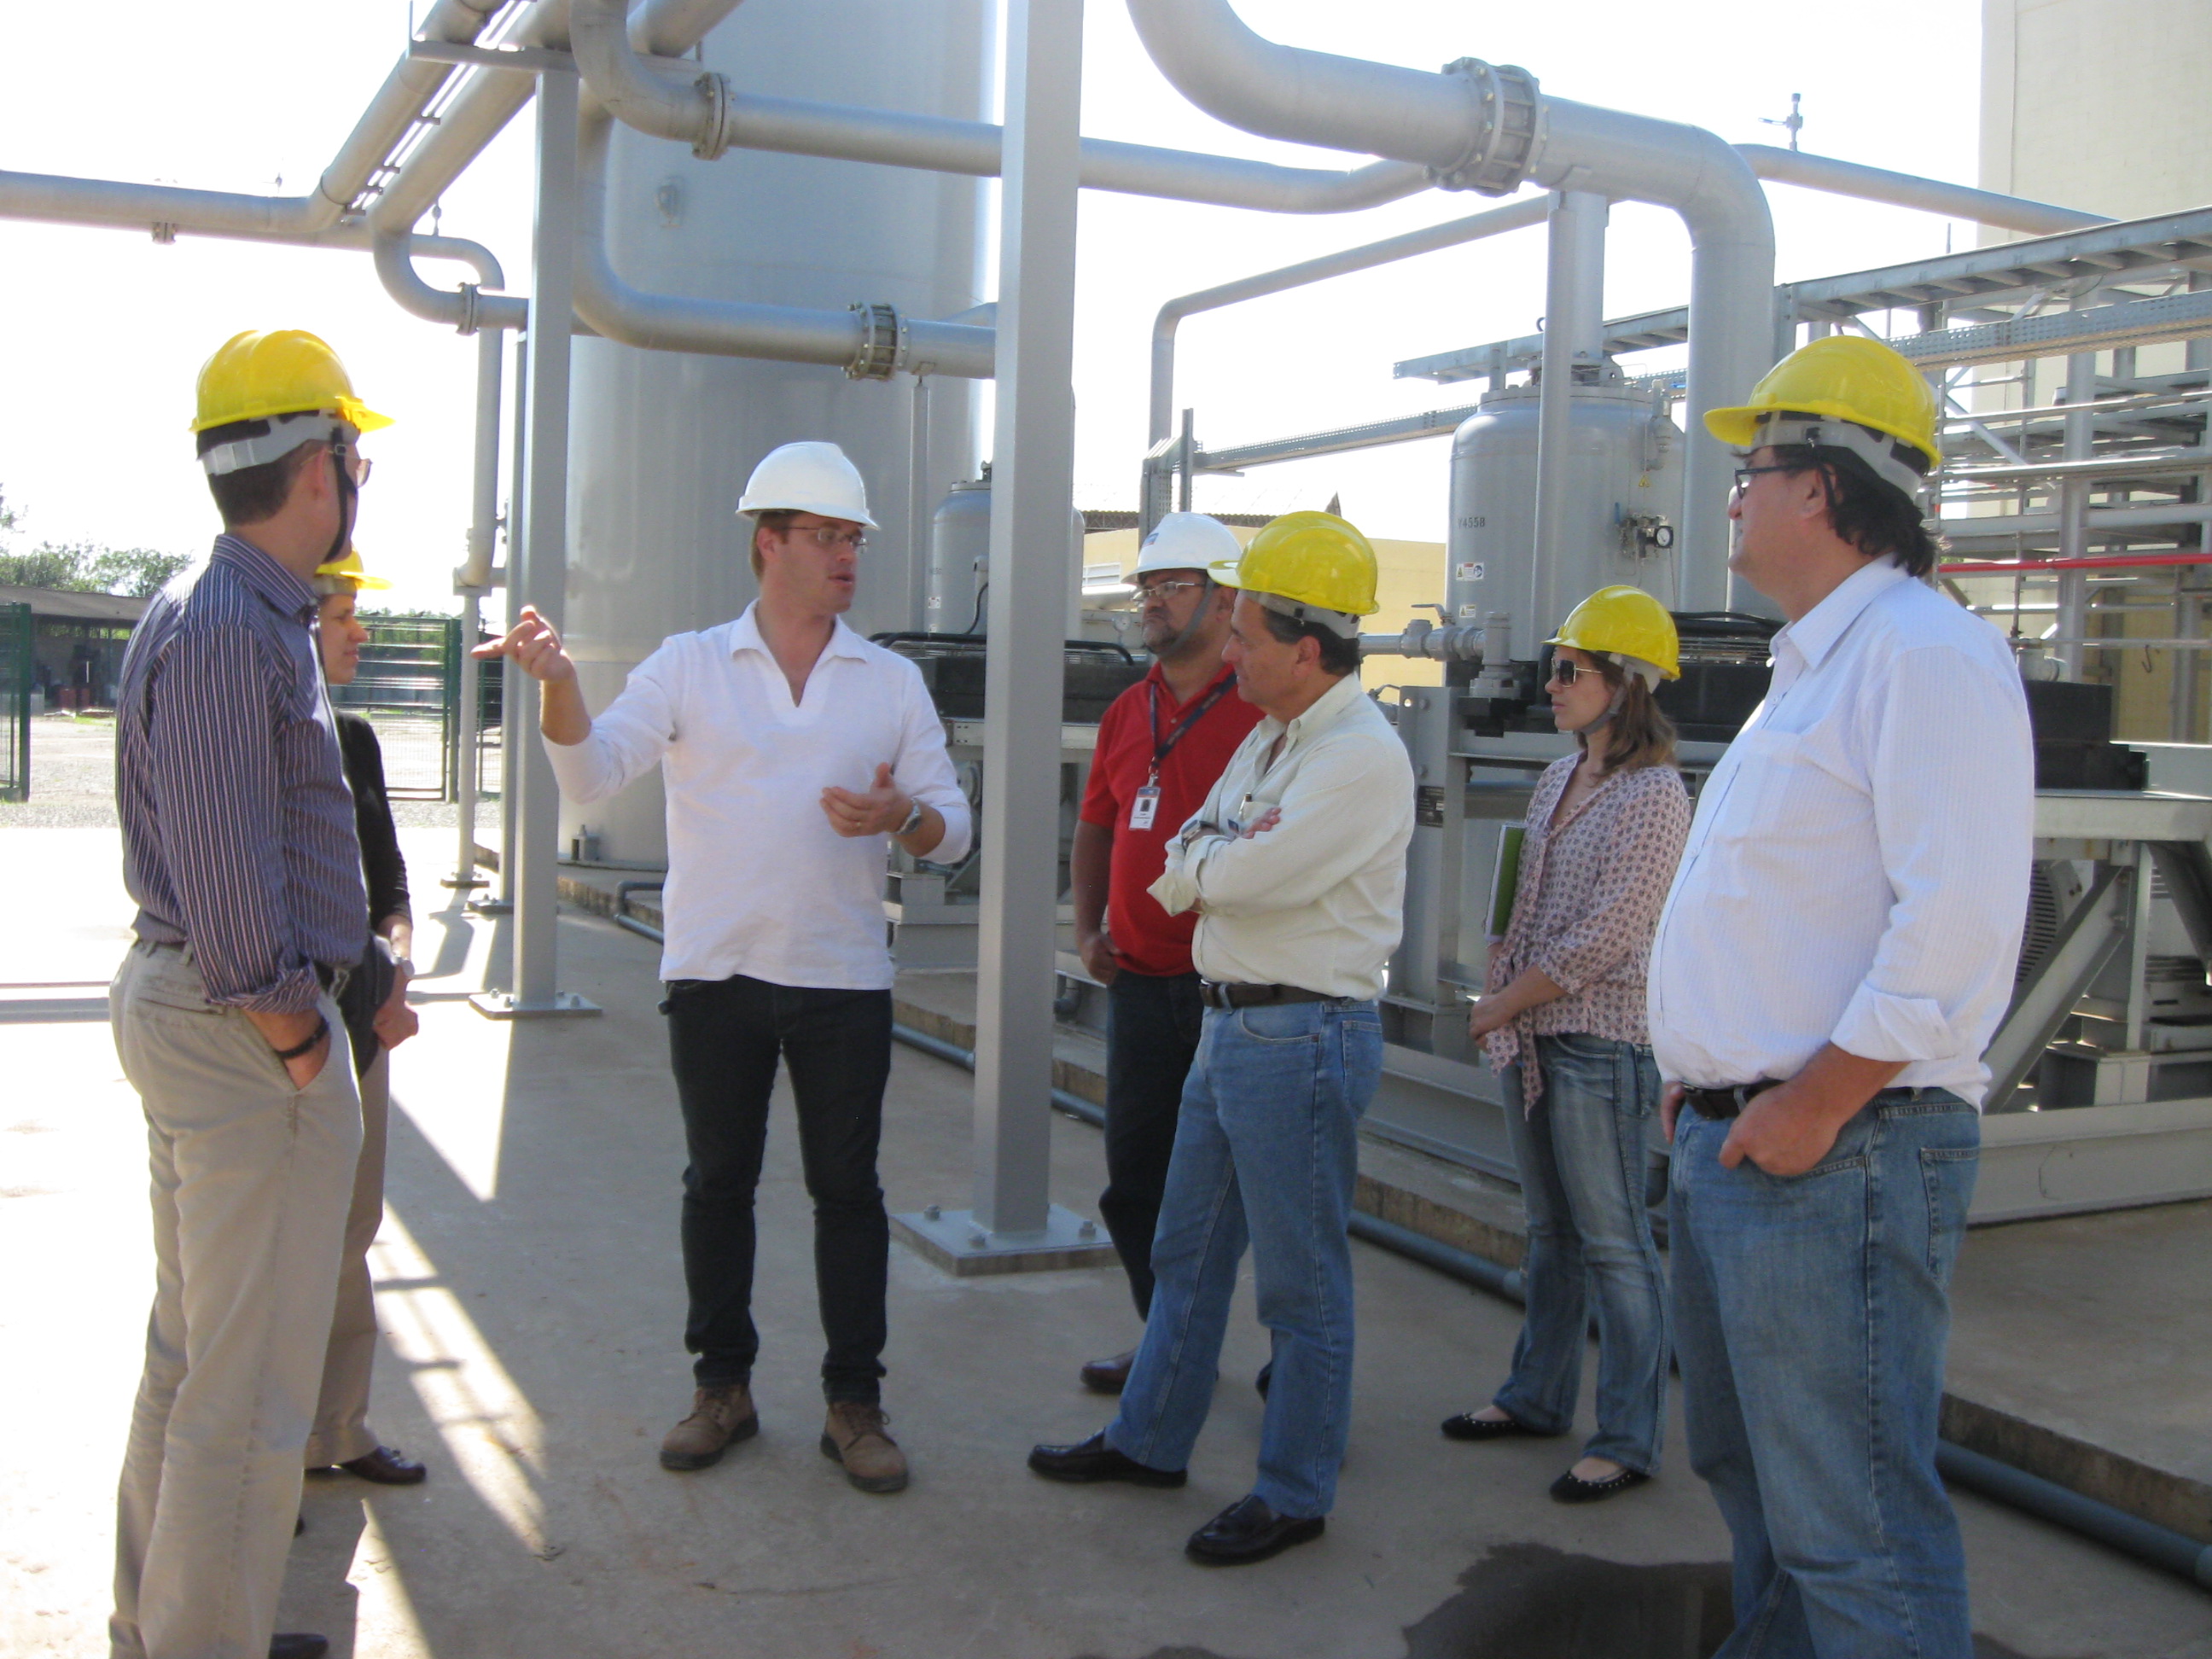 Officials tours the LFG purification and compression skid at the Gramacho Landfill in Brazil.